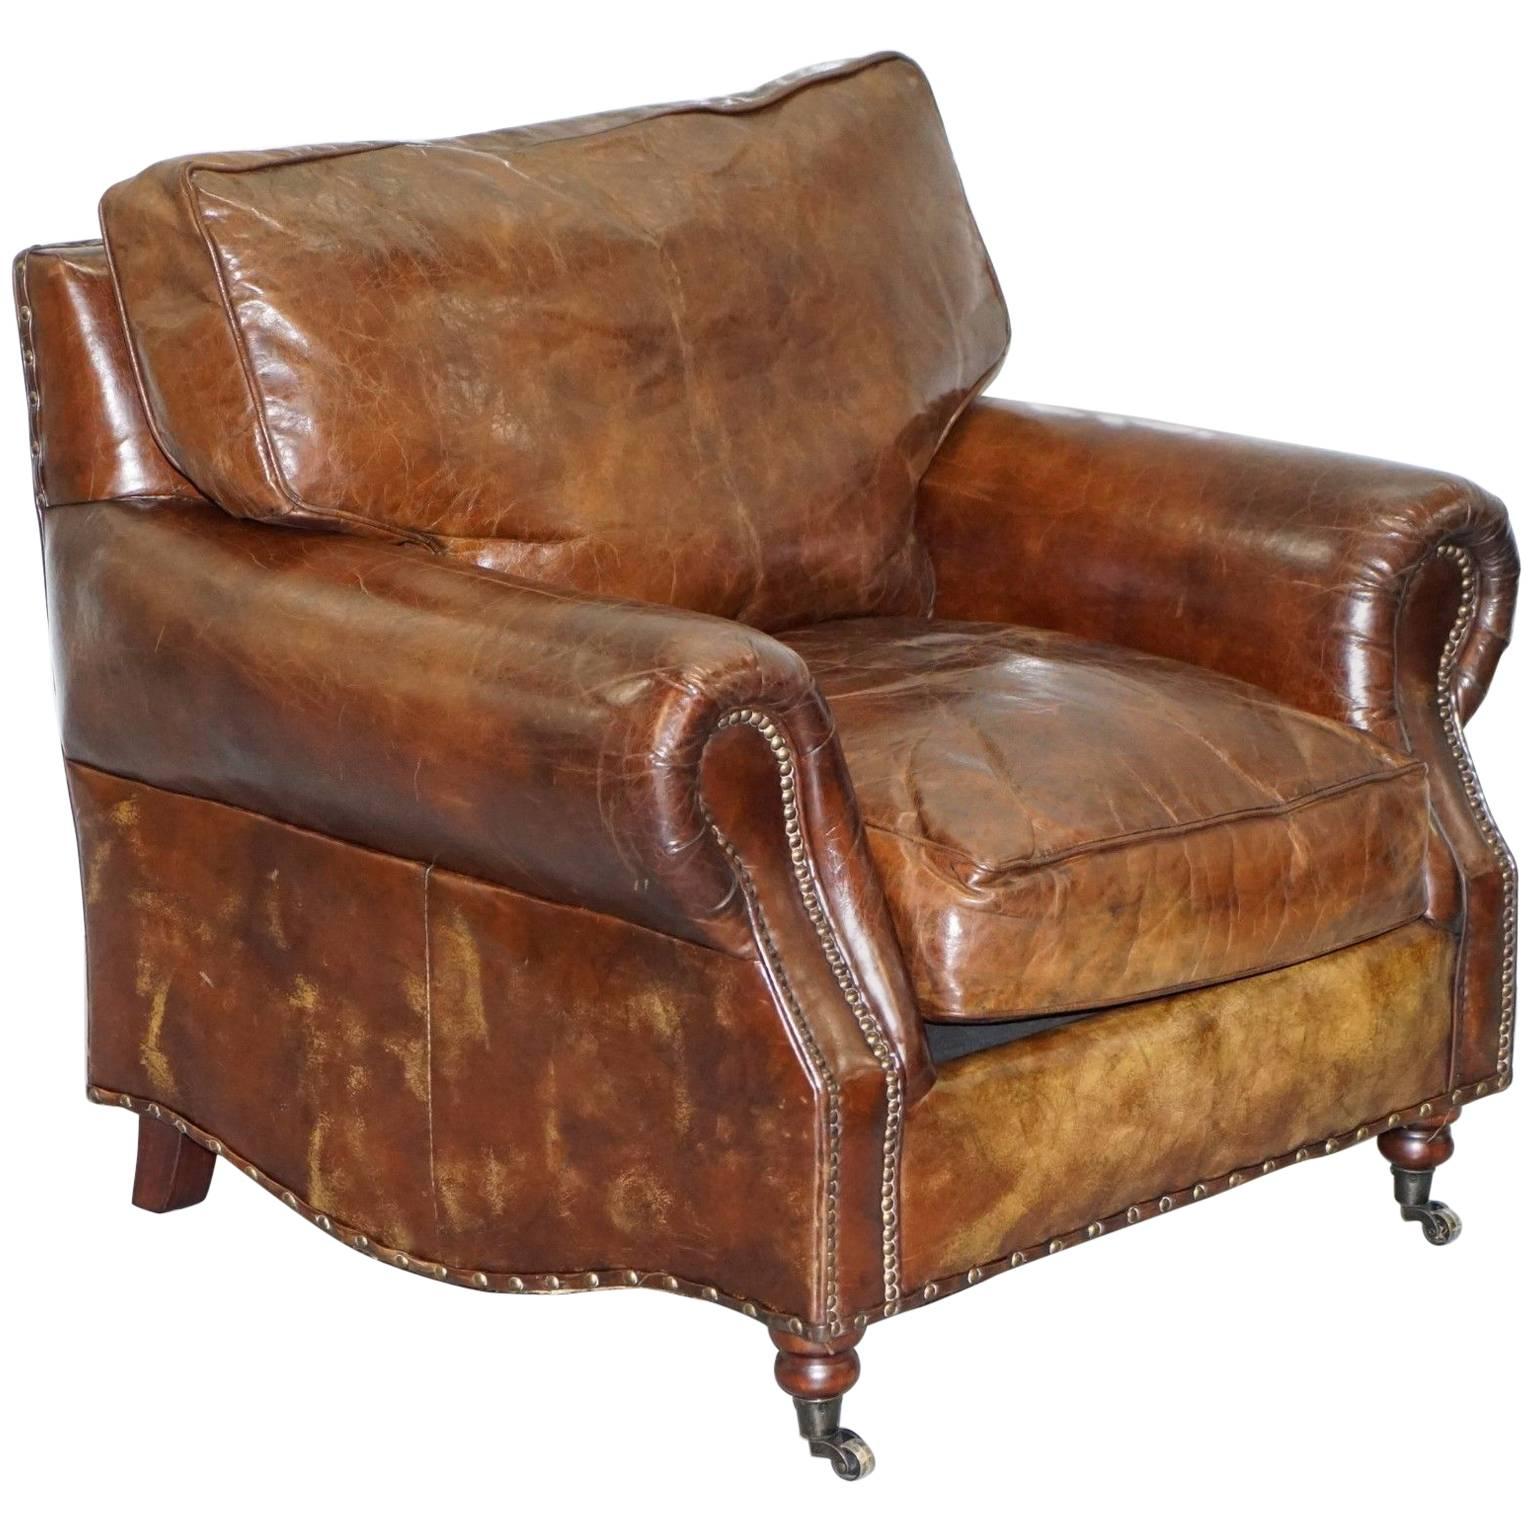 Timothy Oulton Balmoral Heritage Brown Leather Club Armchair Feather Cushions